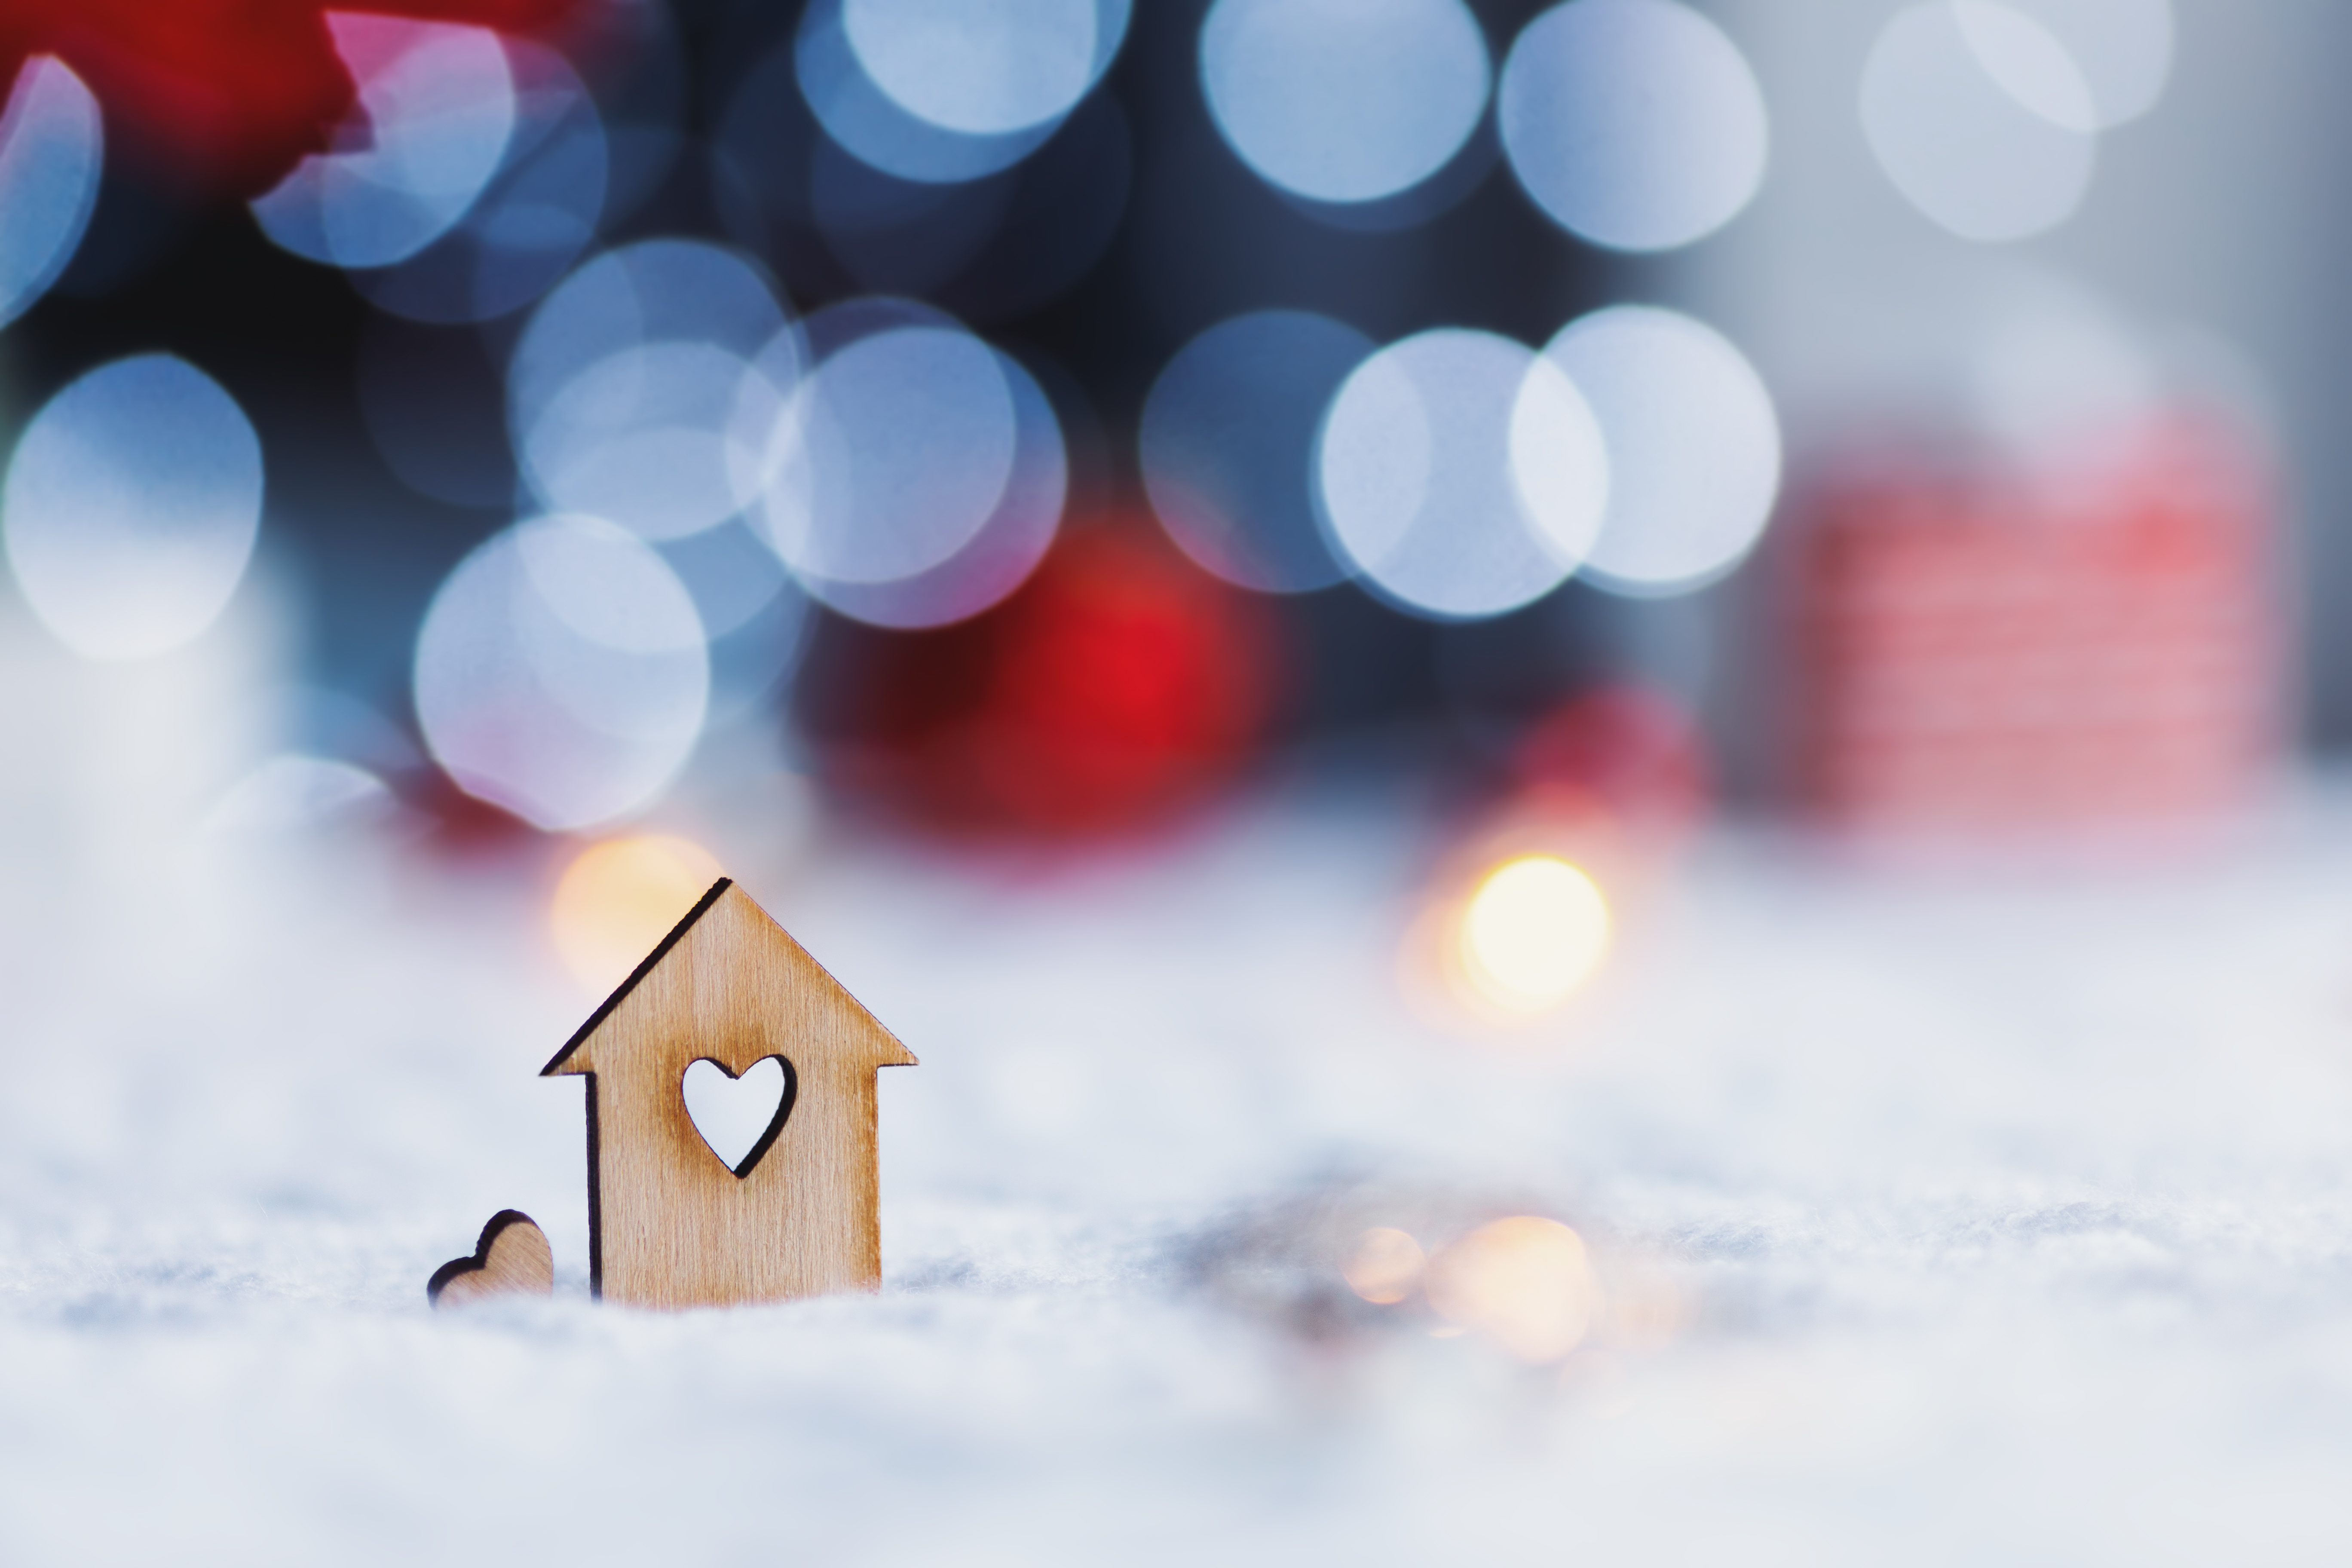 A small wooden home cutout sits in the snow with a heart cut out of the middle of it. Holiday lights and gifts are blurred in the background.